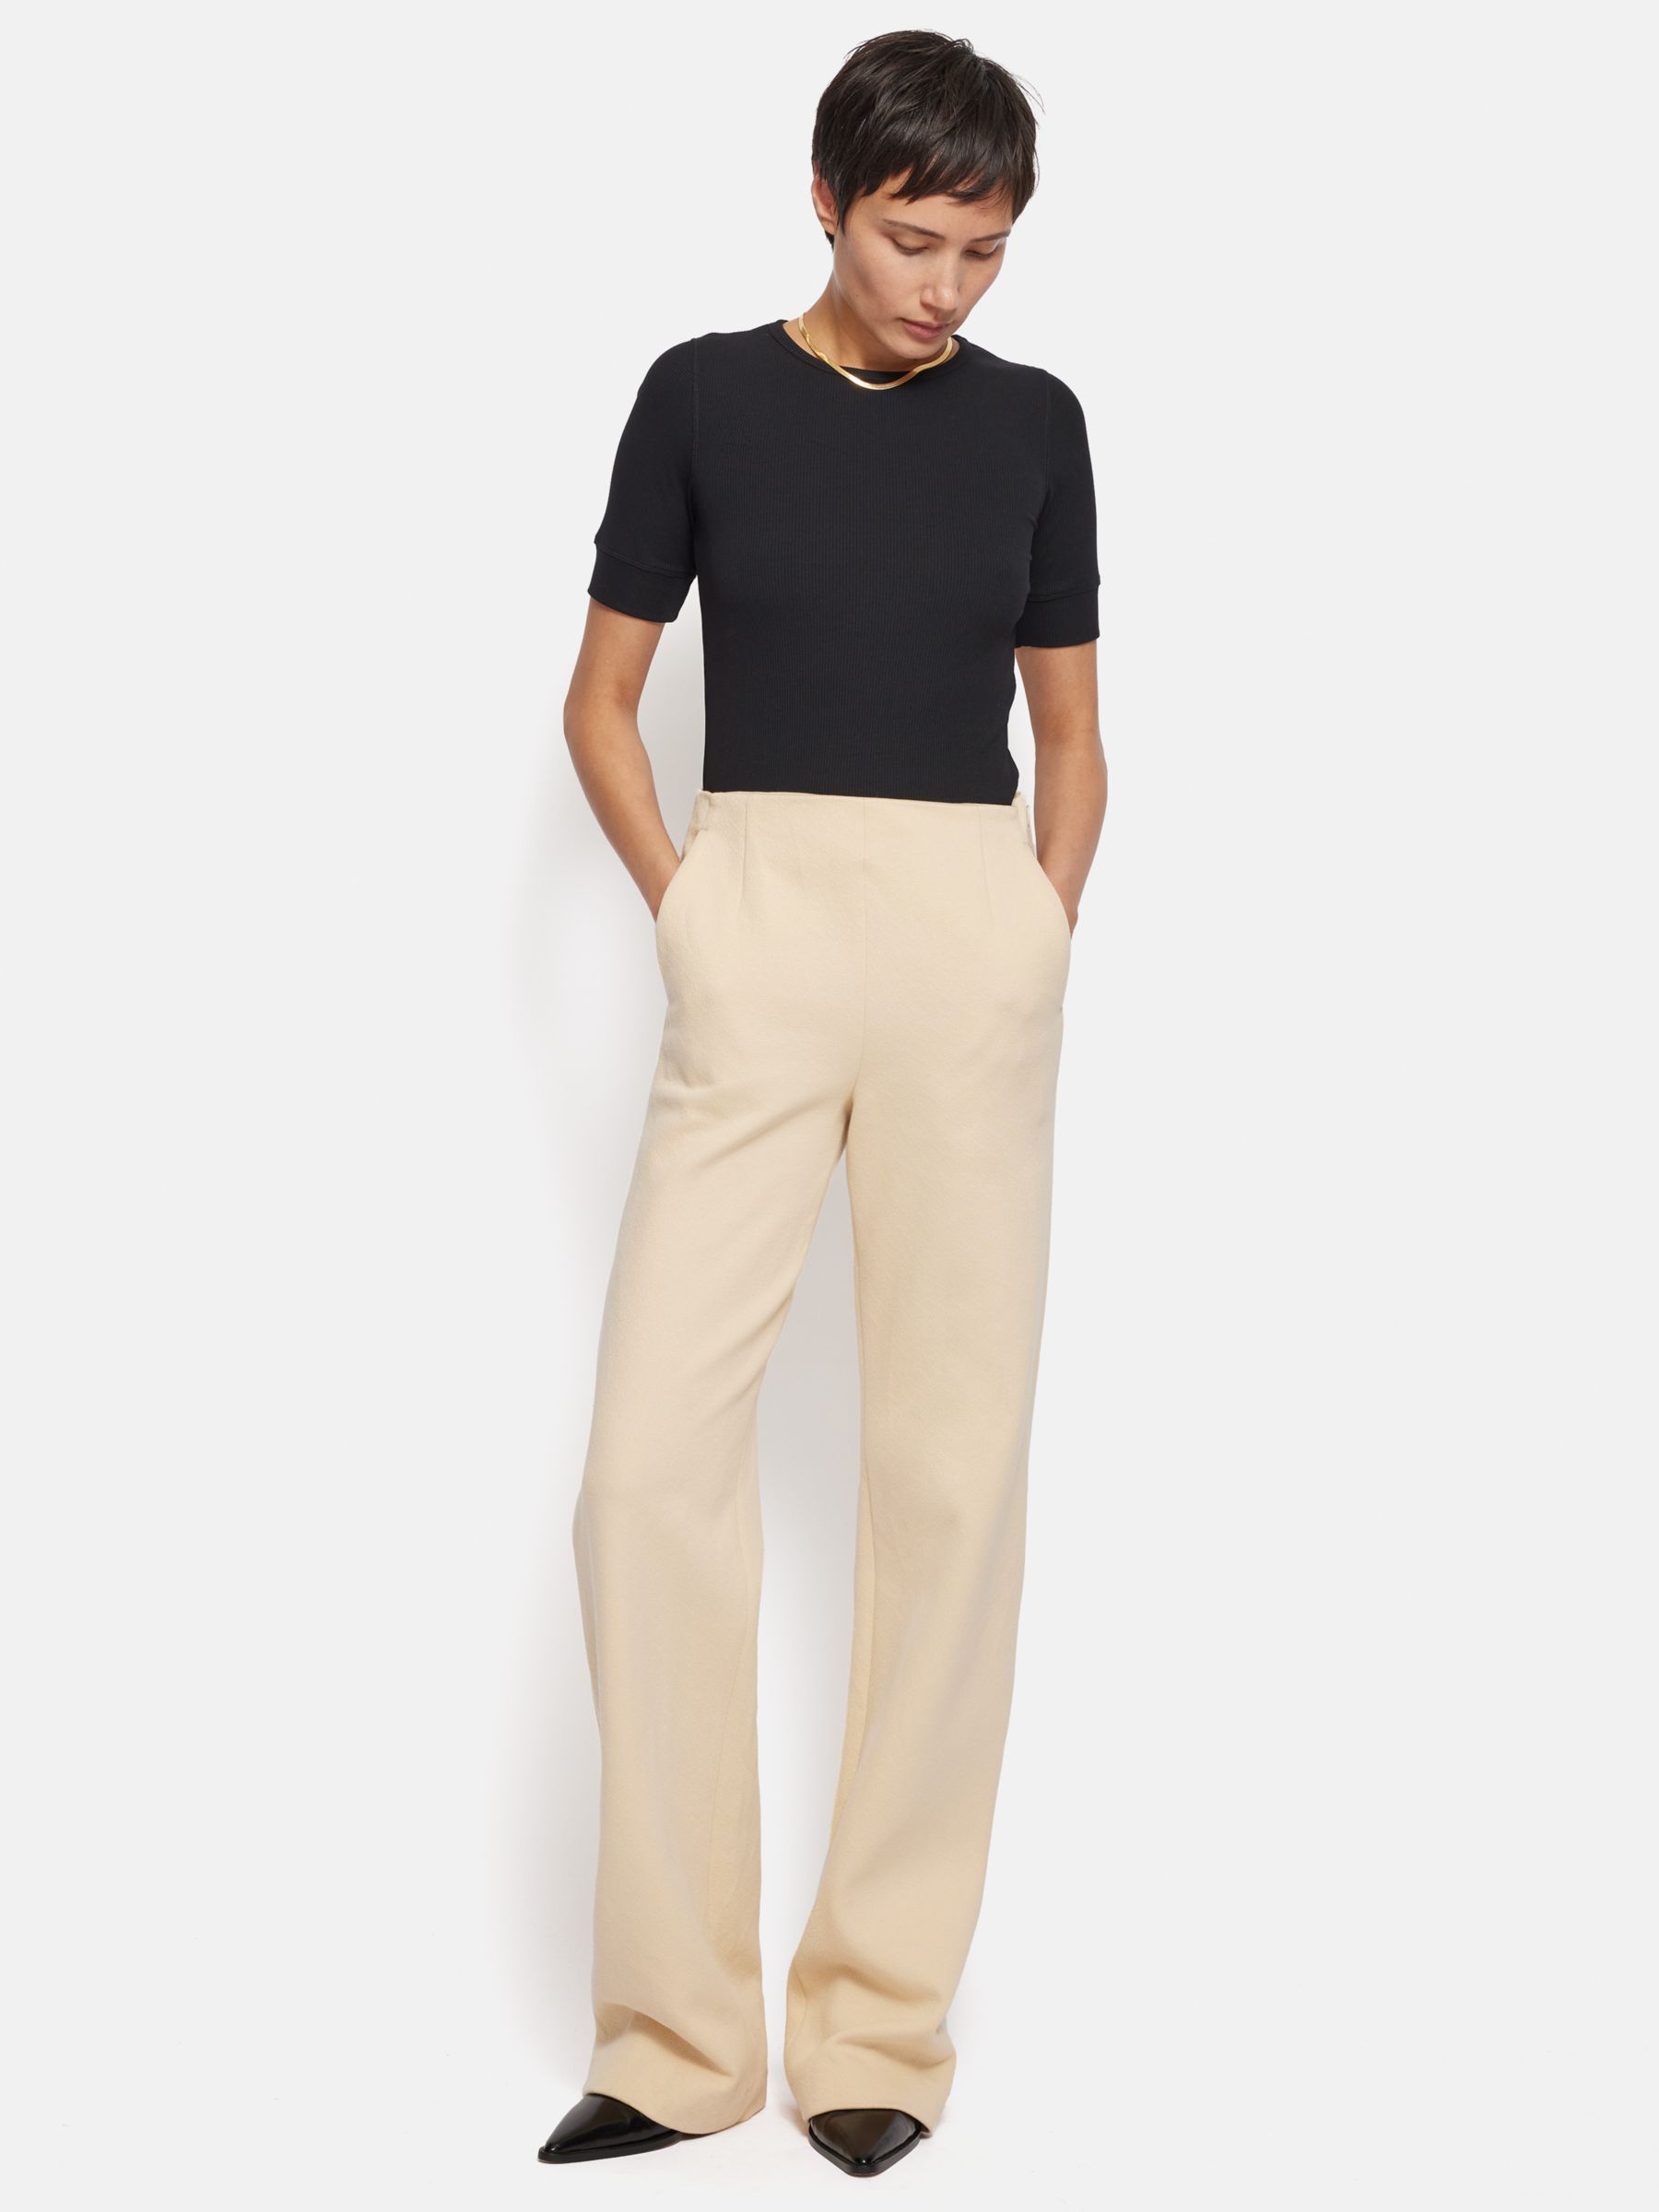 Super Extra Warm bootcut trousers